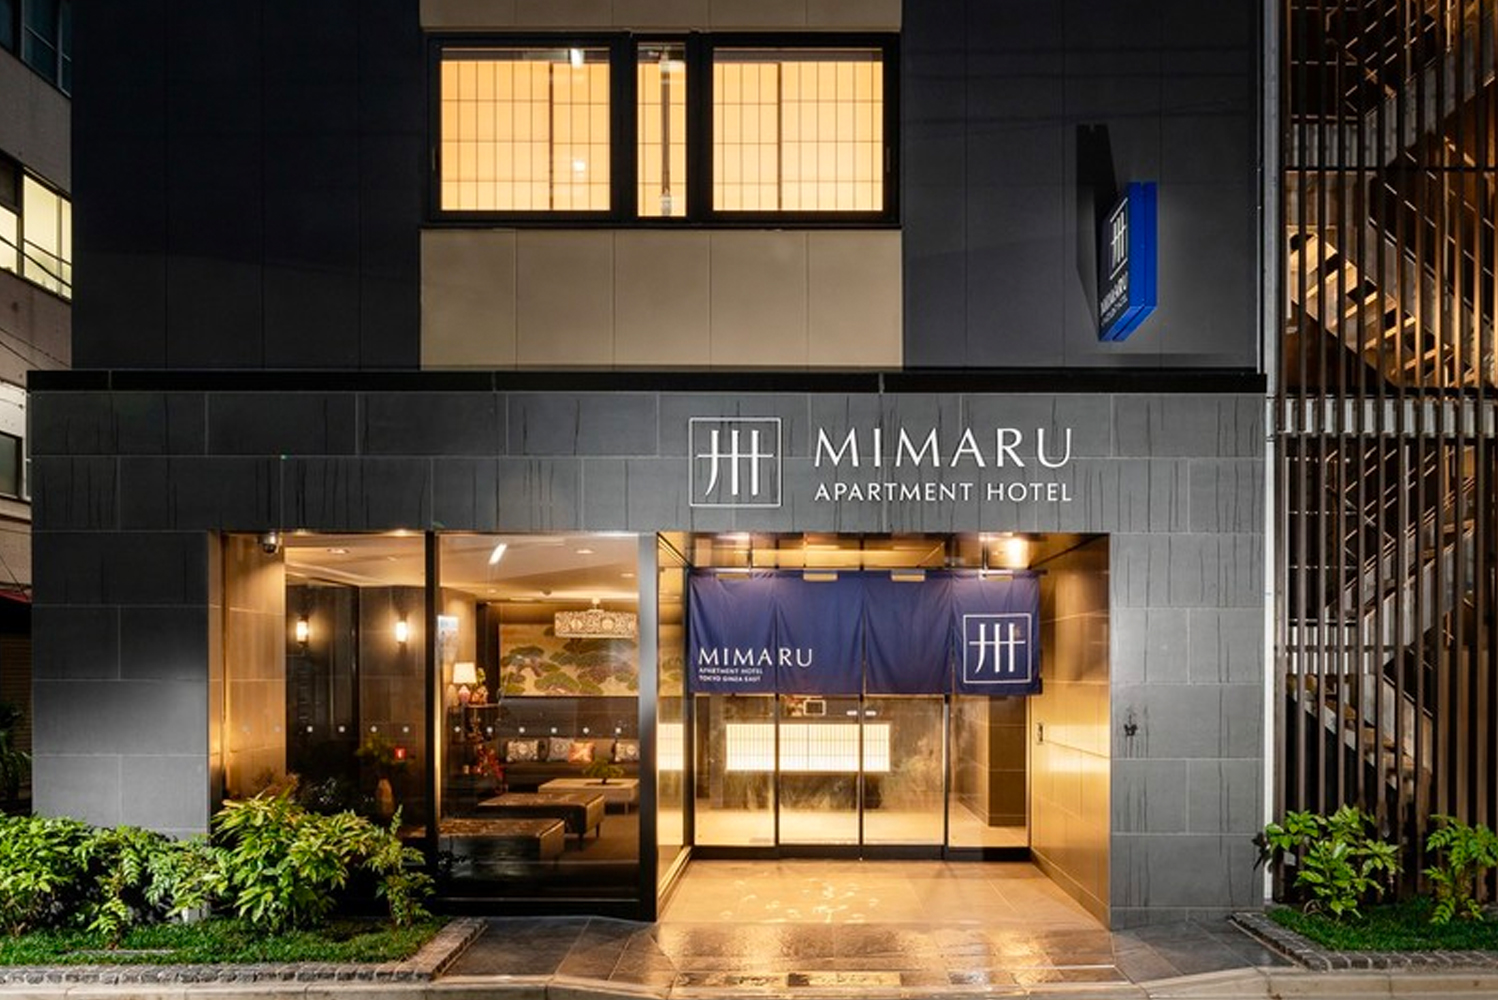 Cosmos Hotel Management a subsidiary of Daiwa House Group opened Mimaru Tokyo Ginza East as the first Apartment Hotel Mimar